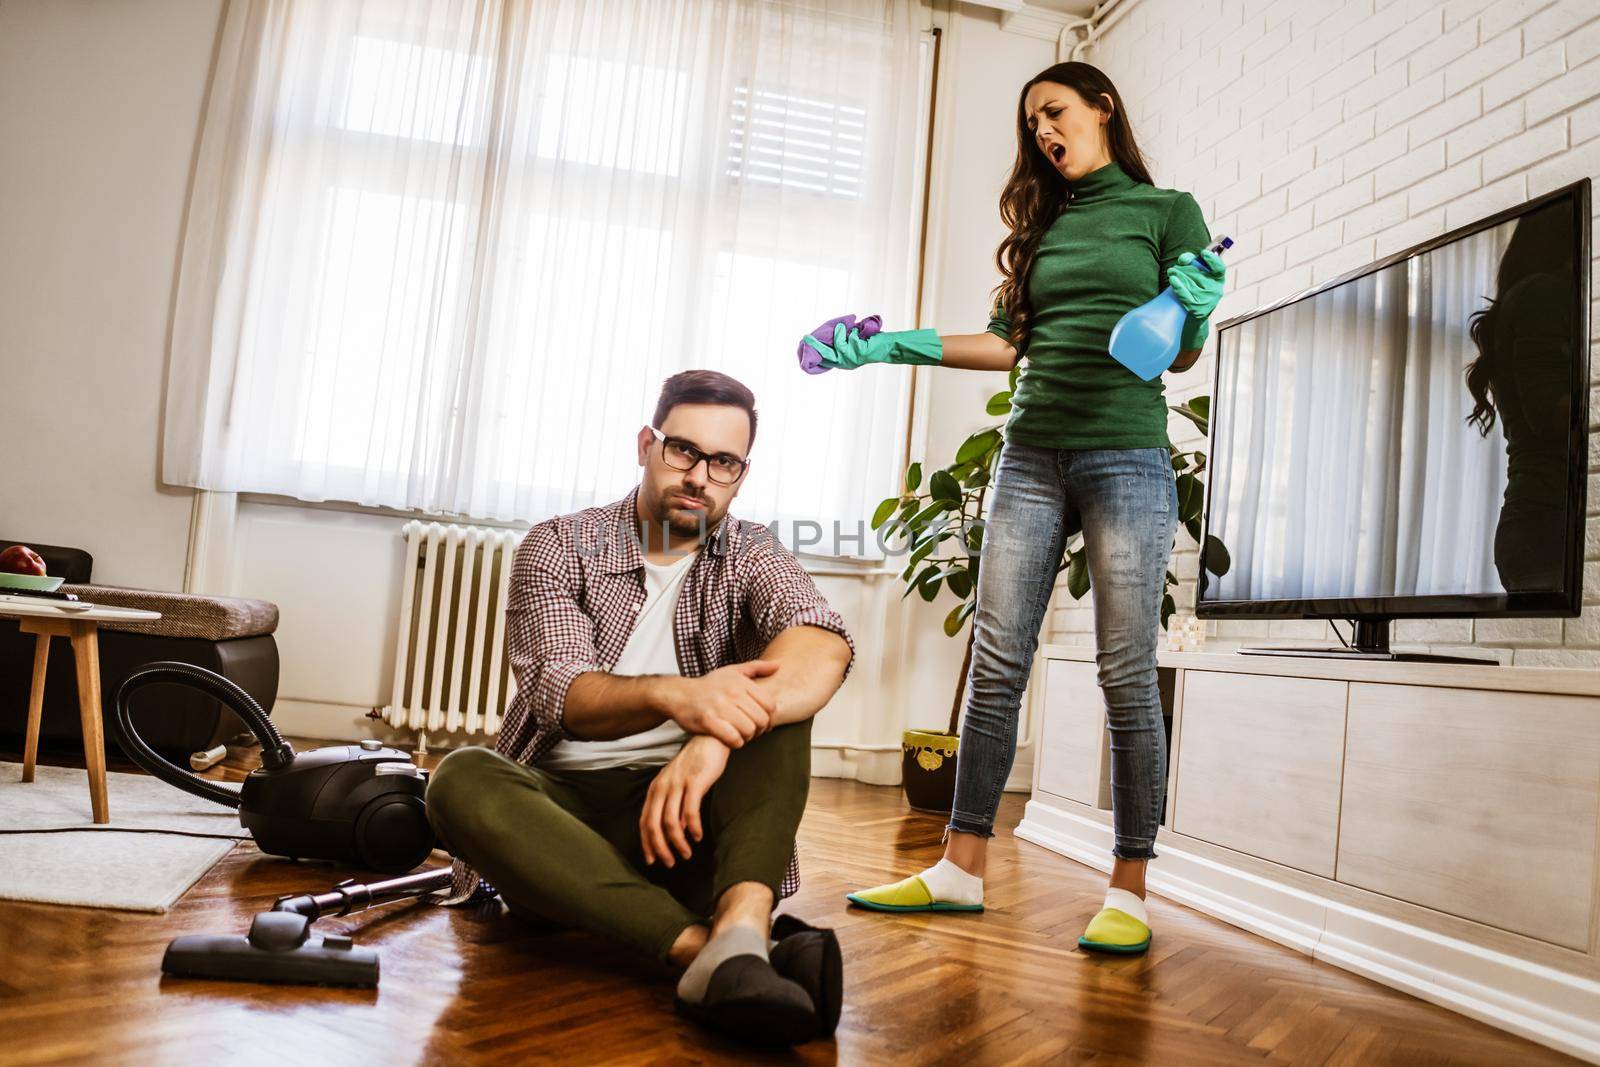 Man is lazy. His wife is telling him to continue cleaning their apartment.